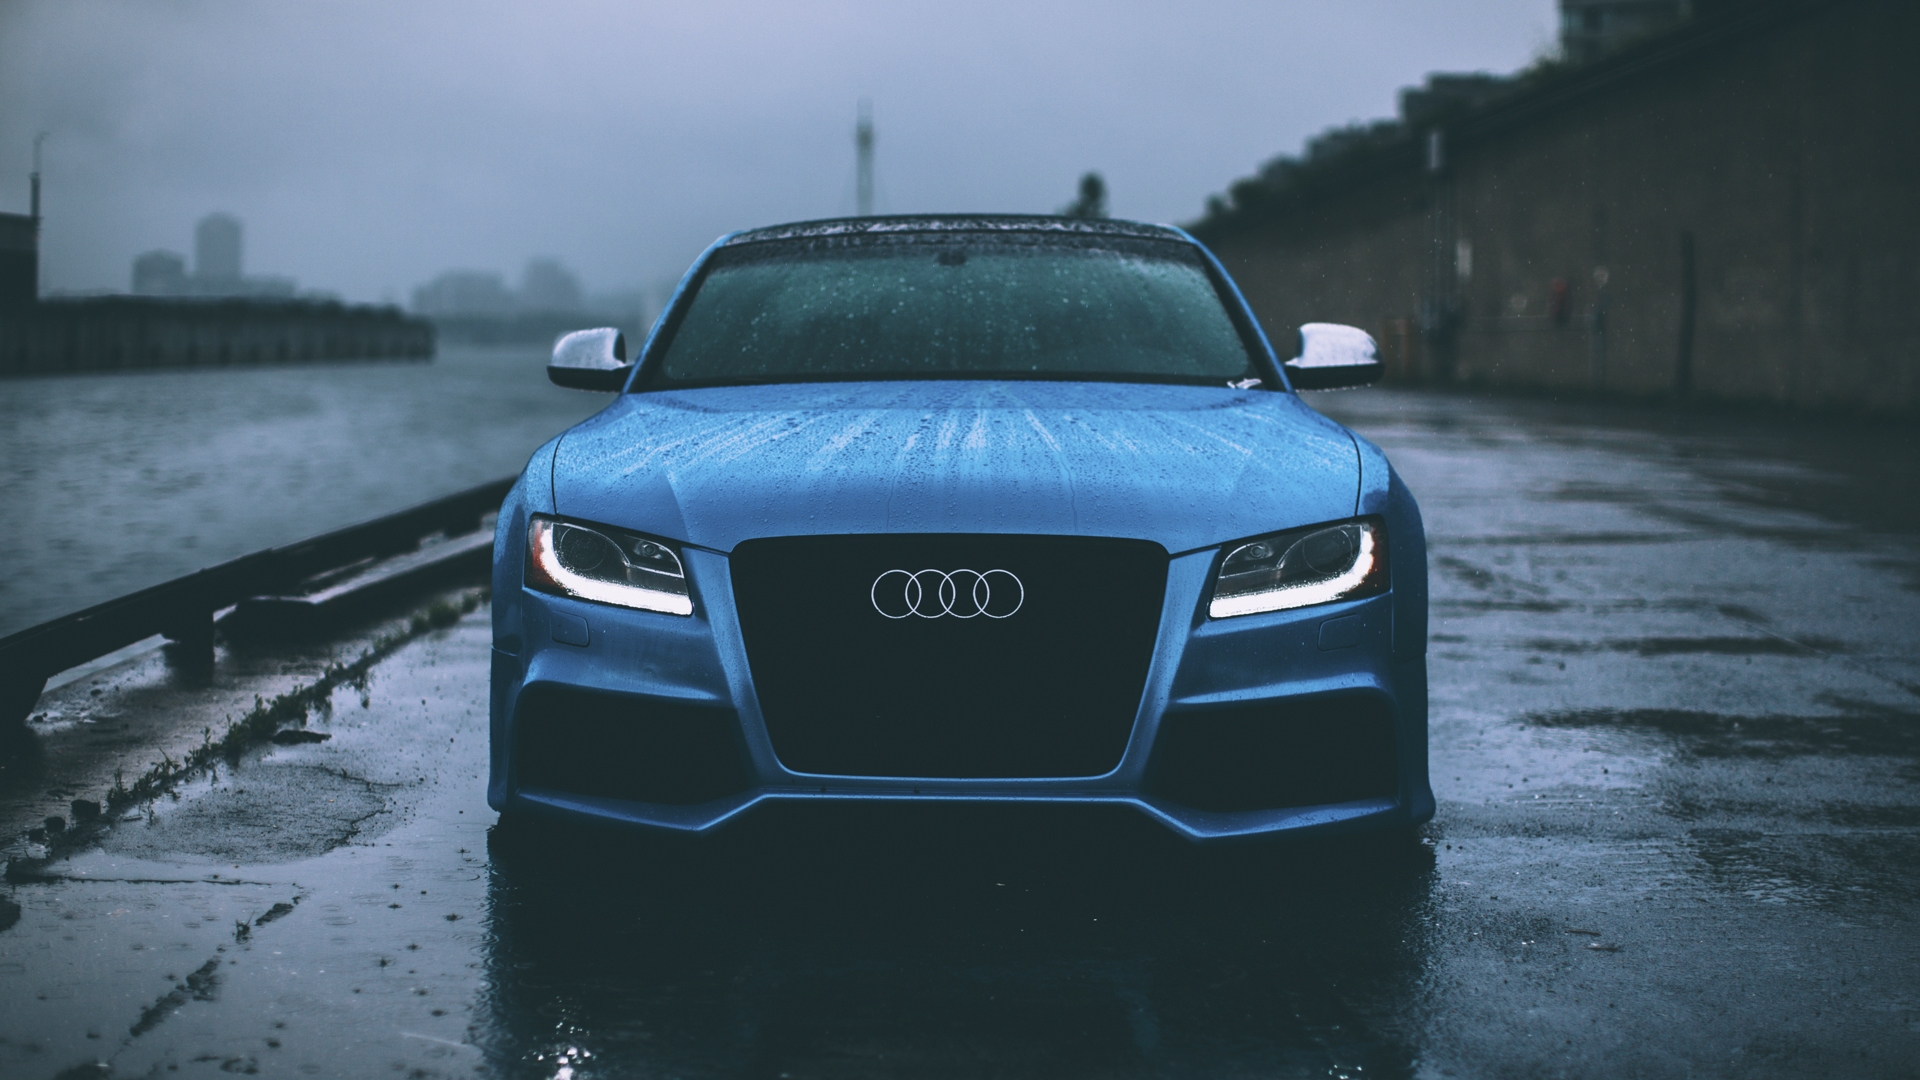 Awesome Audi Wallpapers Hd Lsource Wal